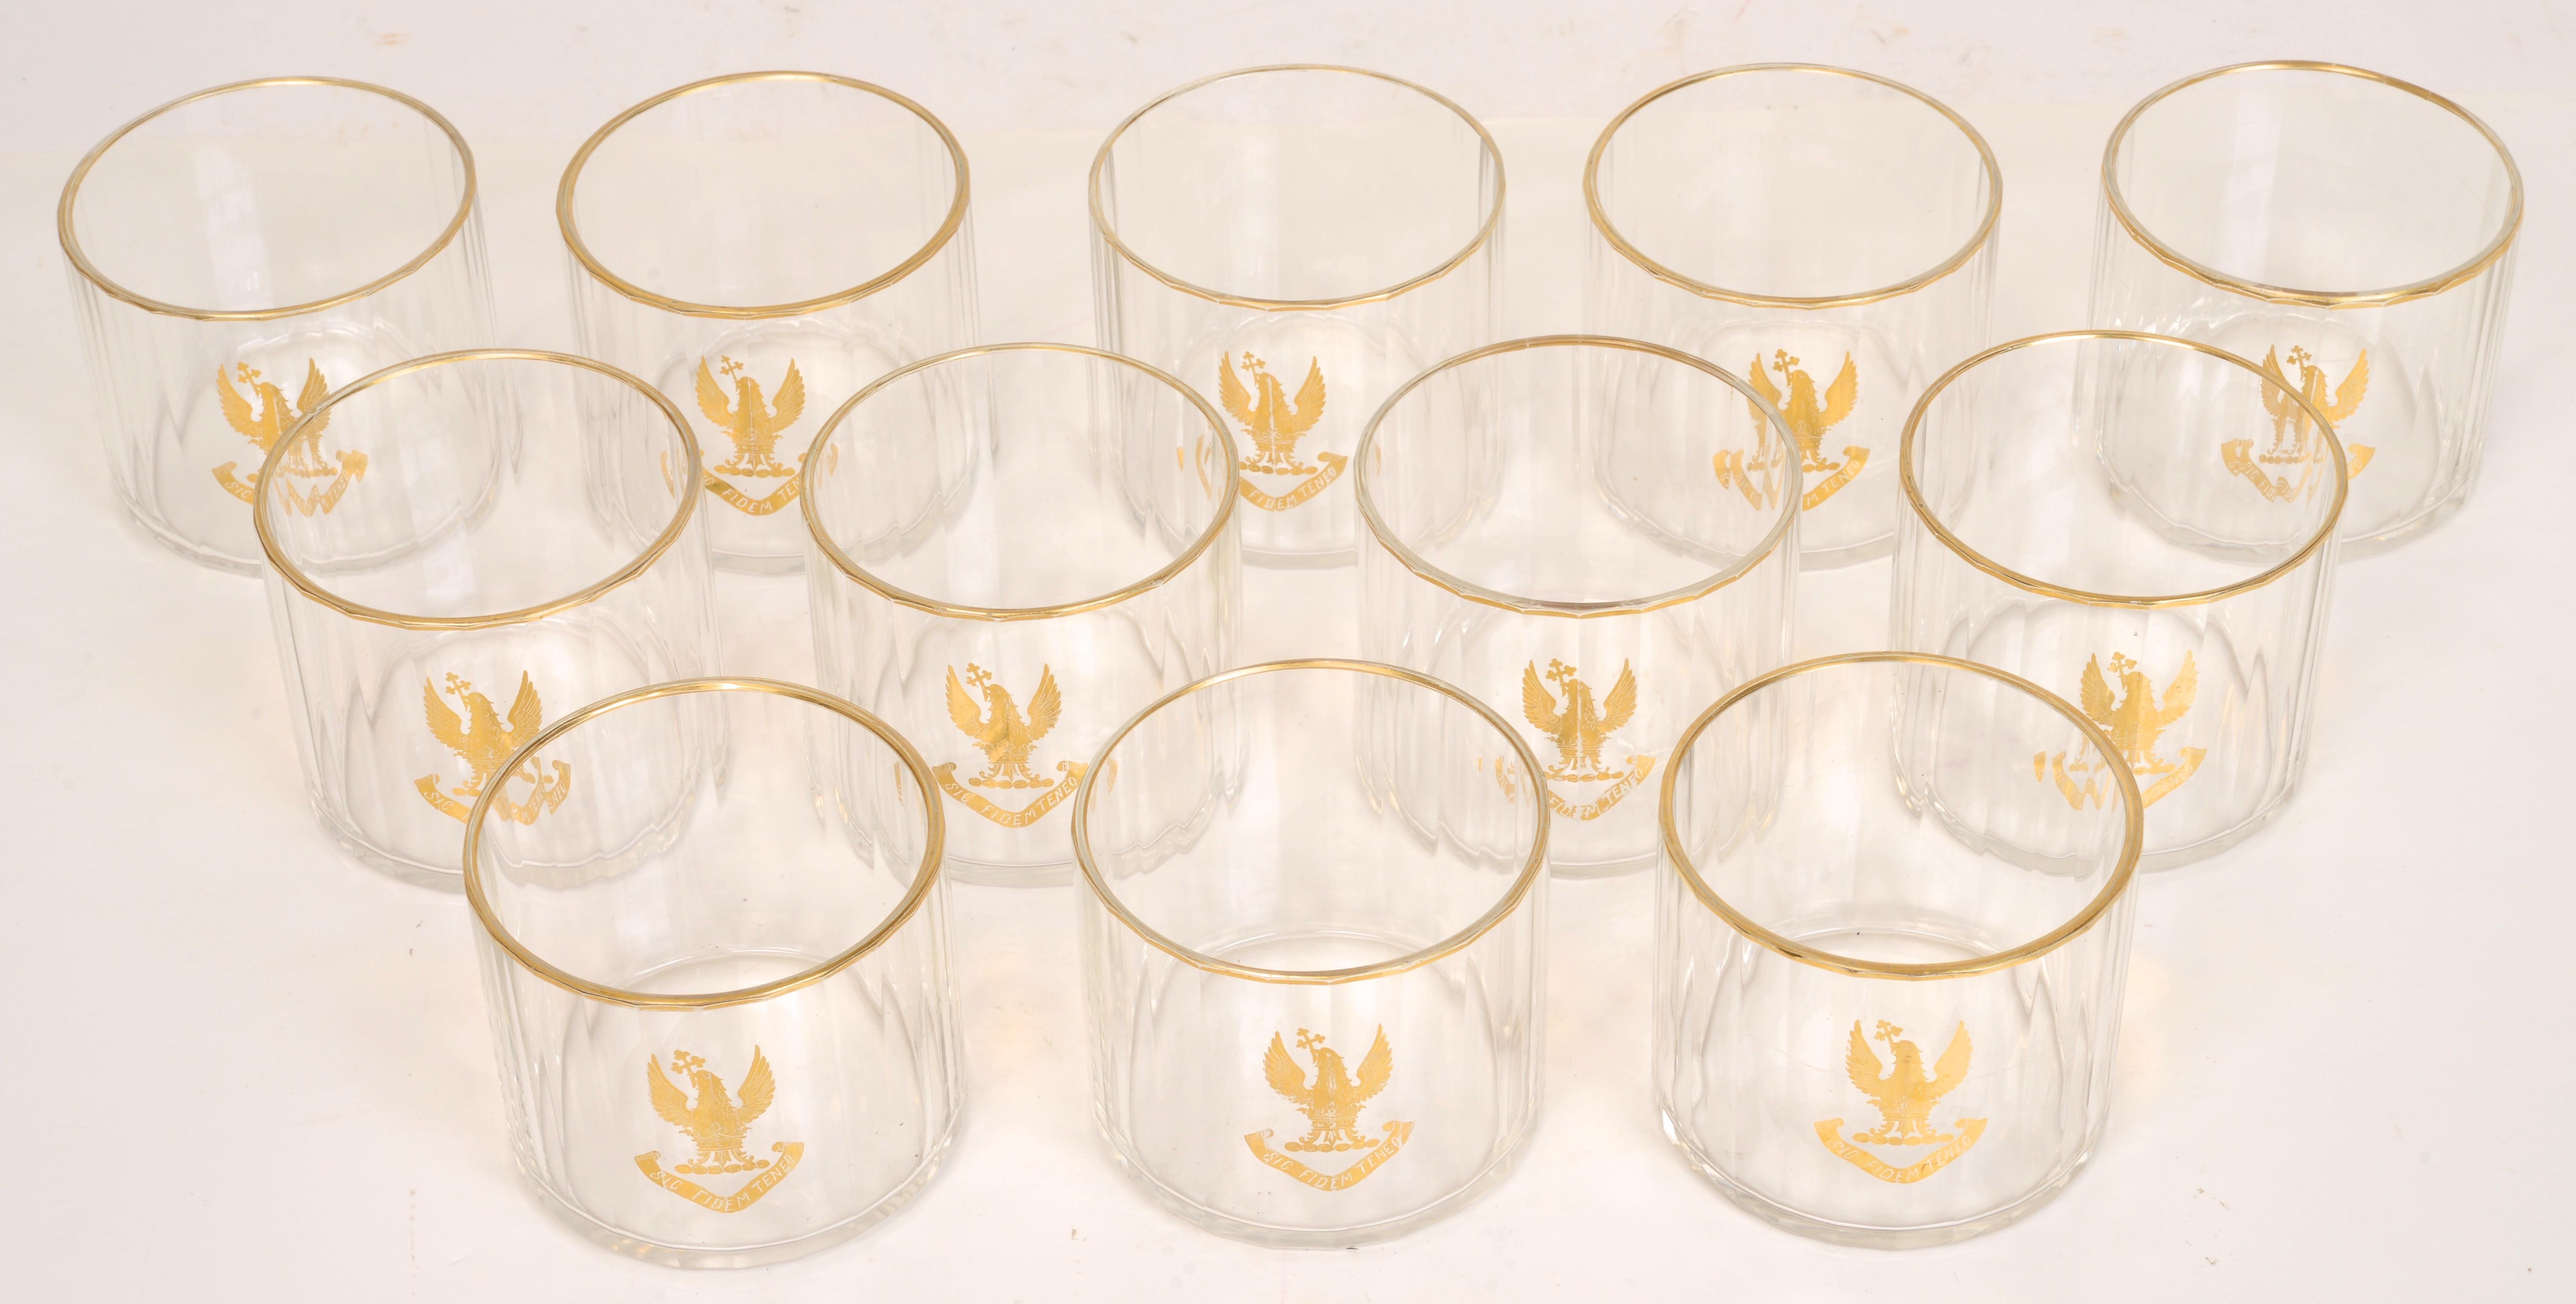 Set of Twelve Armorial, Straight Sided, Gilt Decorated, Face-Cut, 24 Panel Crystal Glasses. These glasses are the standard choice for serving whiskey and old fashioned drinks. They are mouth-blown and have a ground pontil. The gilded rims and